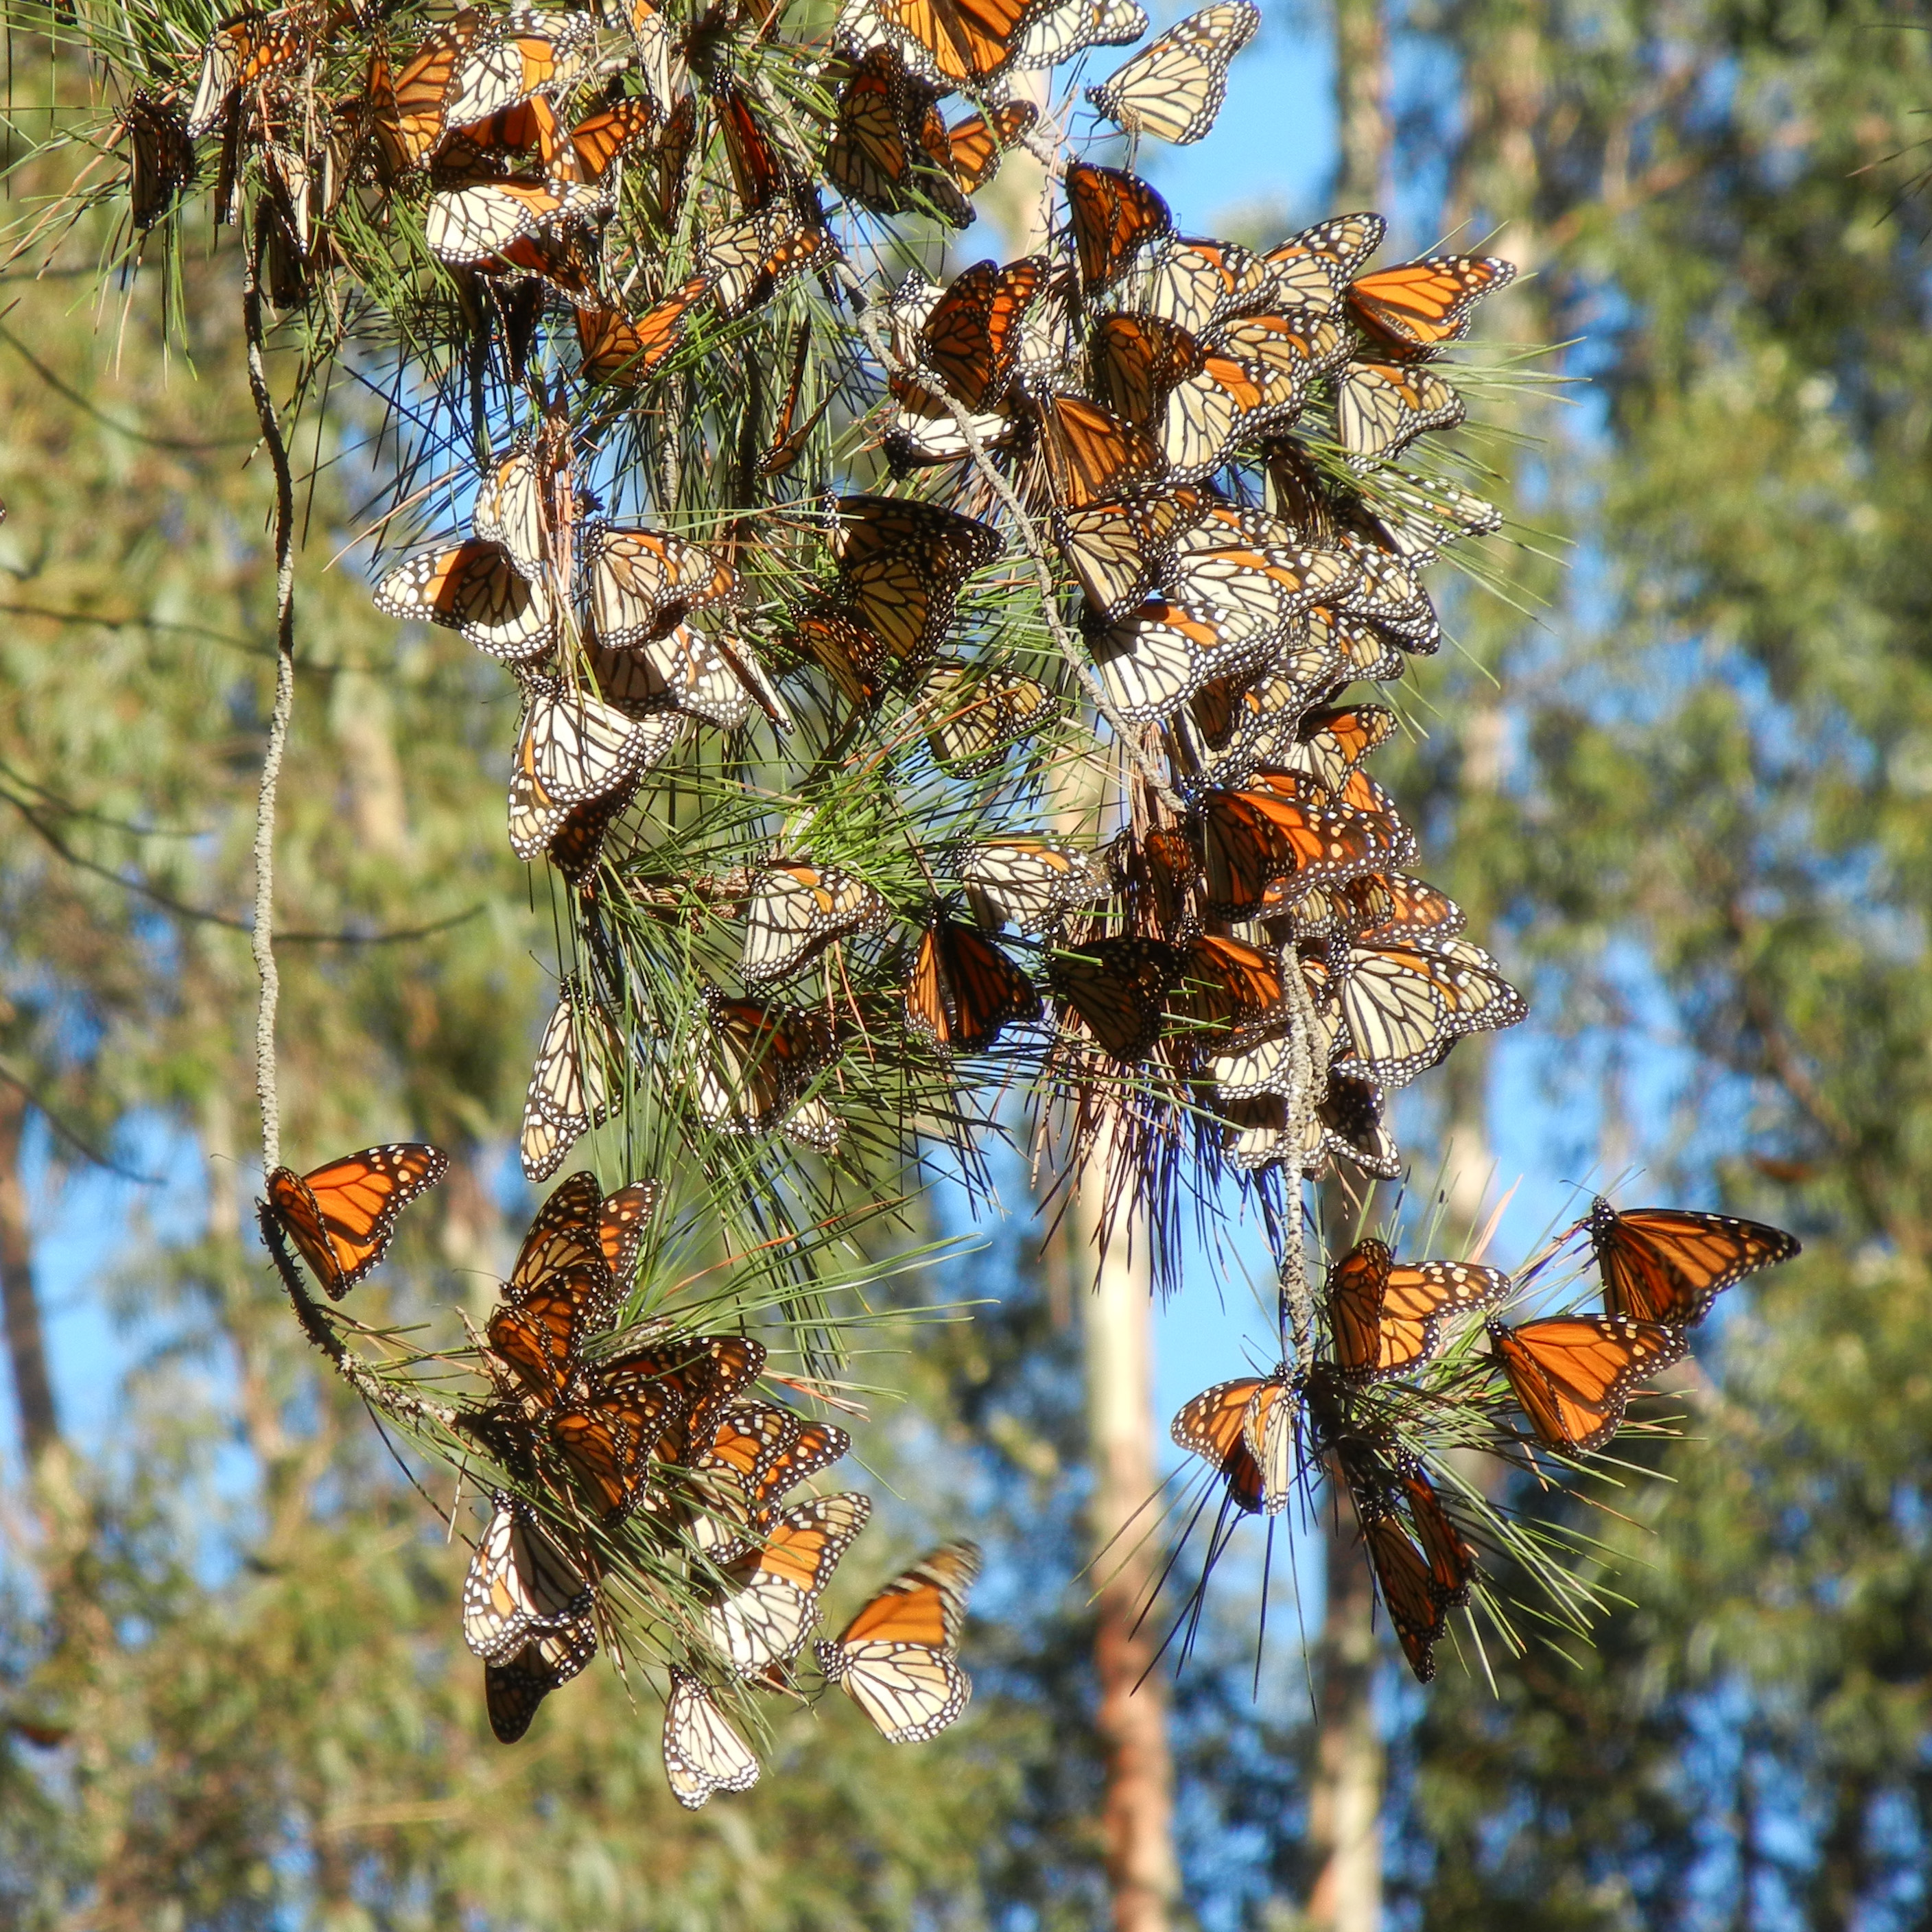 Monarchs cluster on a pine branch. The butterflies that have their wings closed are more drab in color, resembling dead leaves. The butterflies that have their wings open are bright orange and stand out against the scene's browns, greens, and blues.